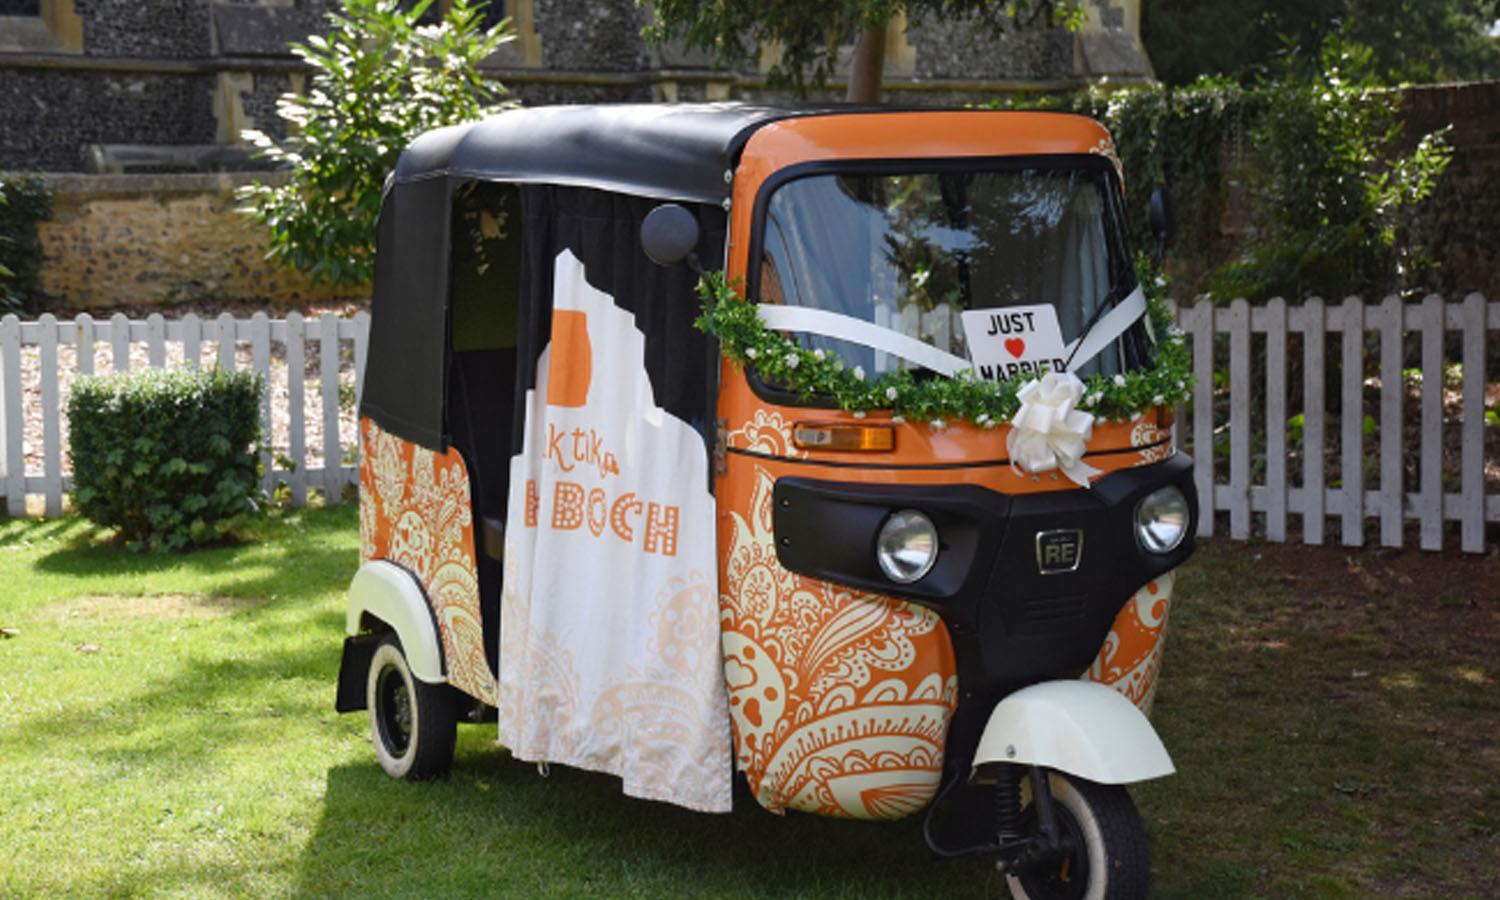 Wedding tuk tuk in the grounds of The Elephant Hotel. Photo Credit: Lorna Richerby Photography